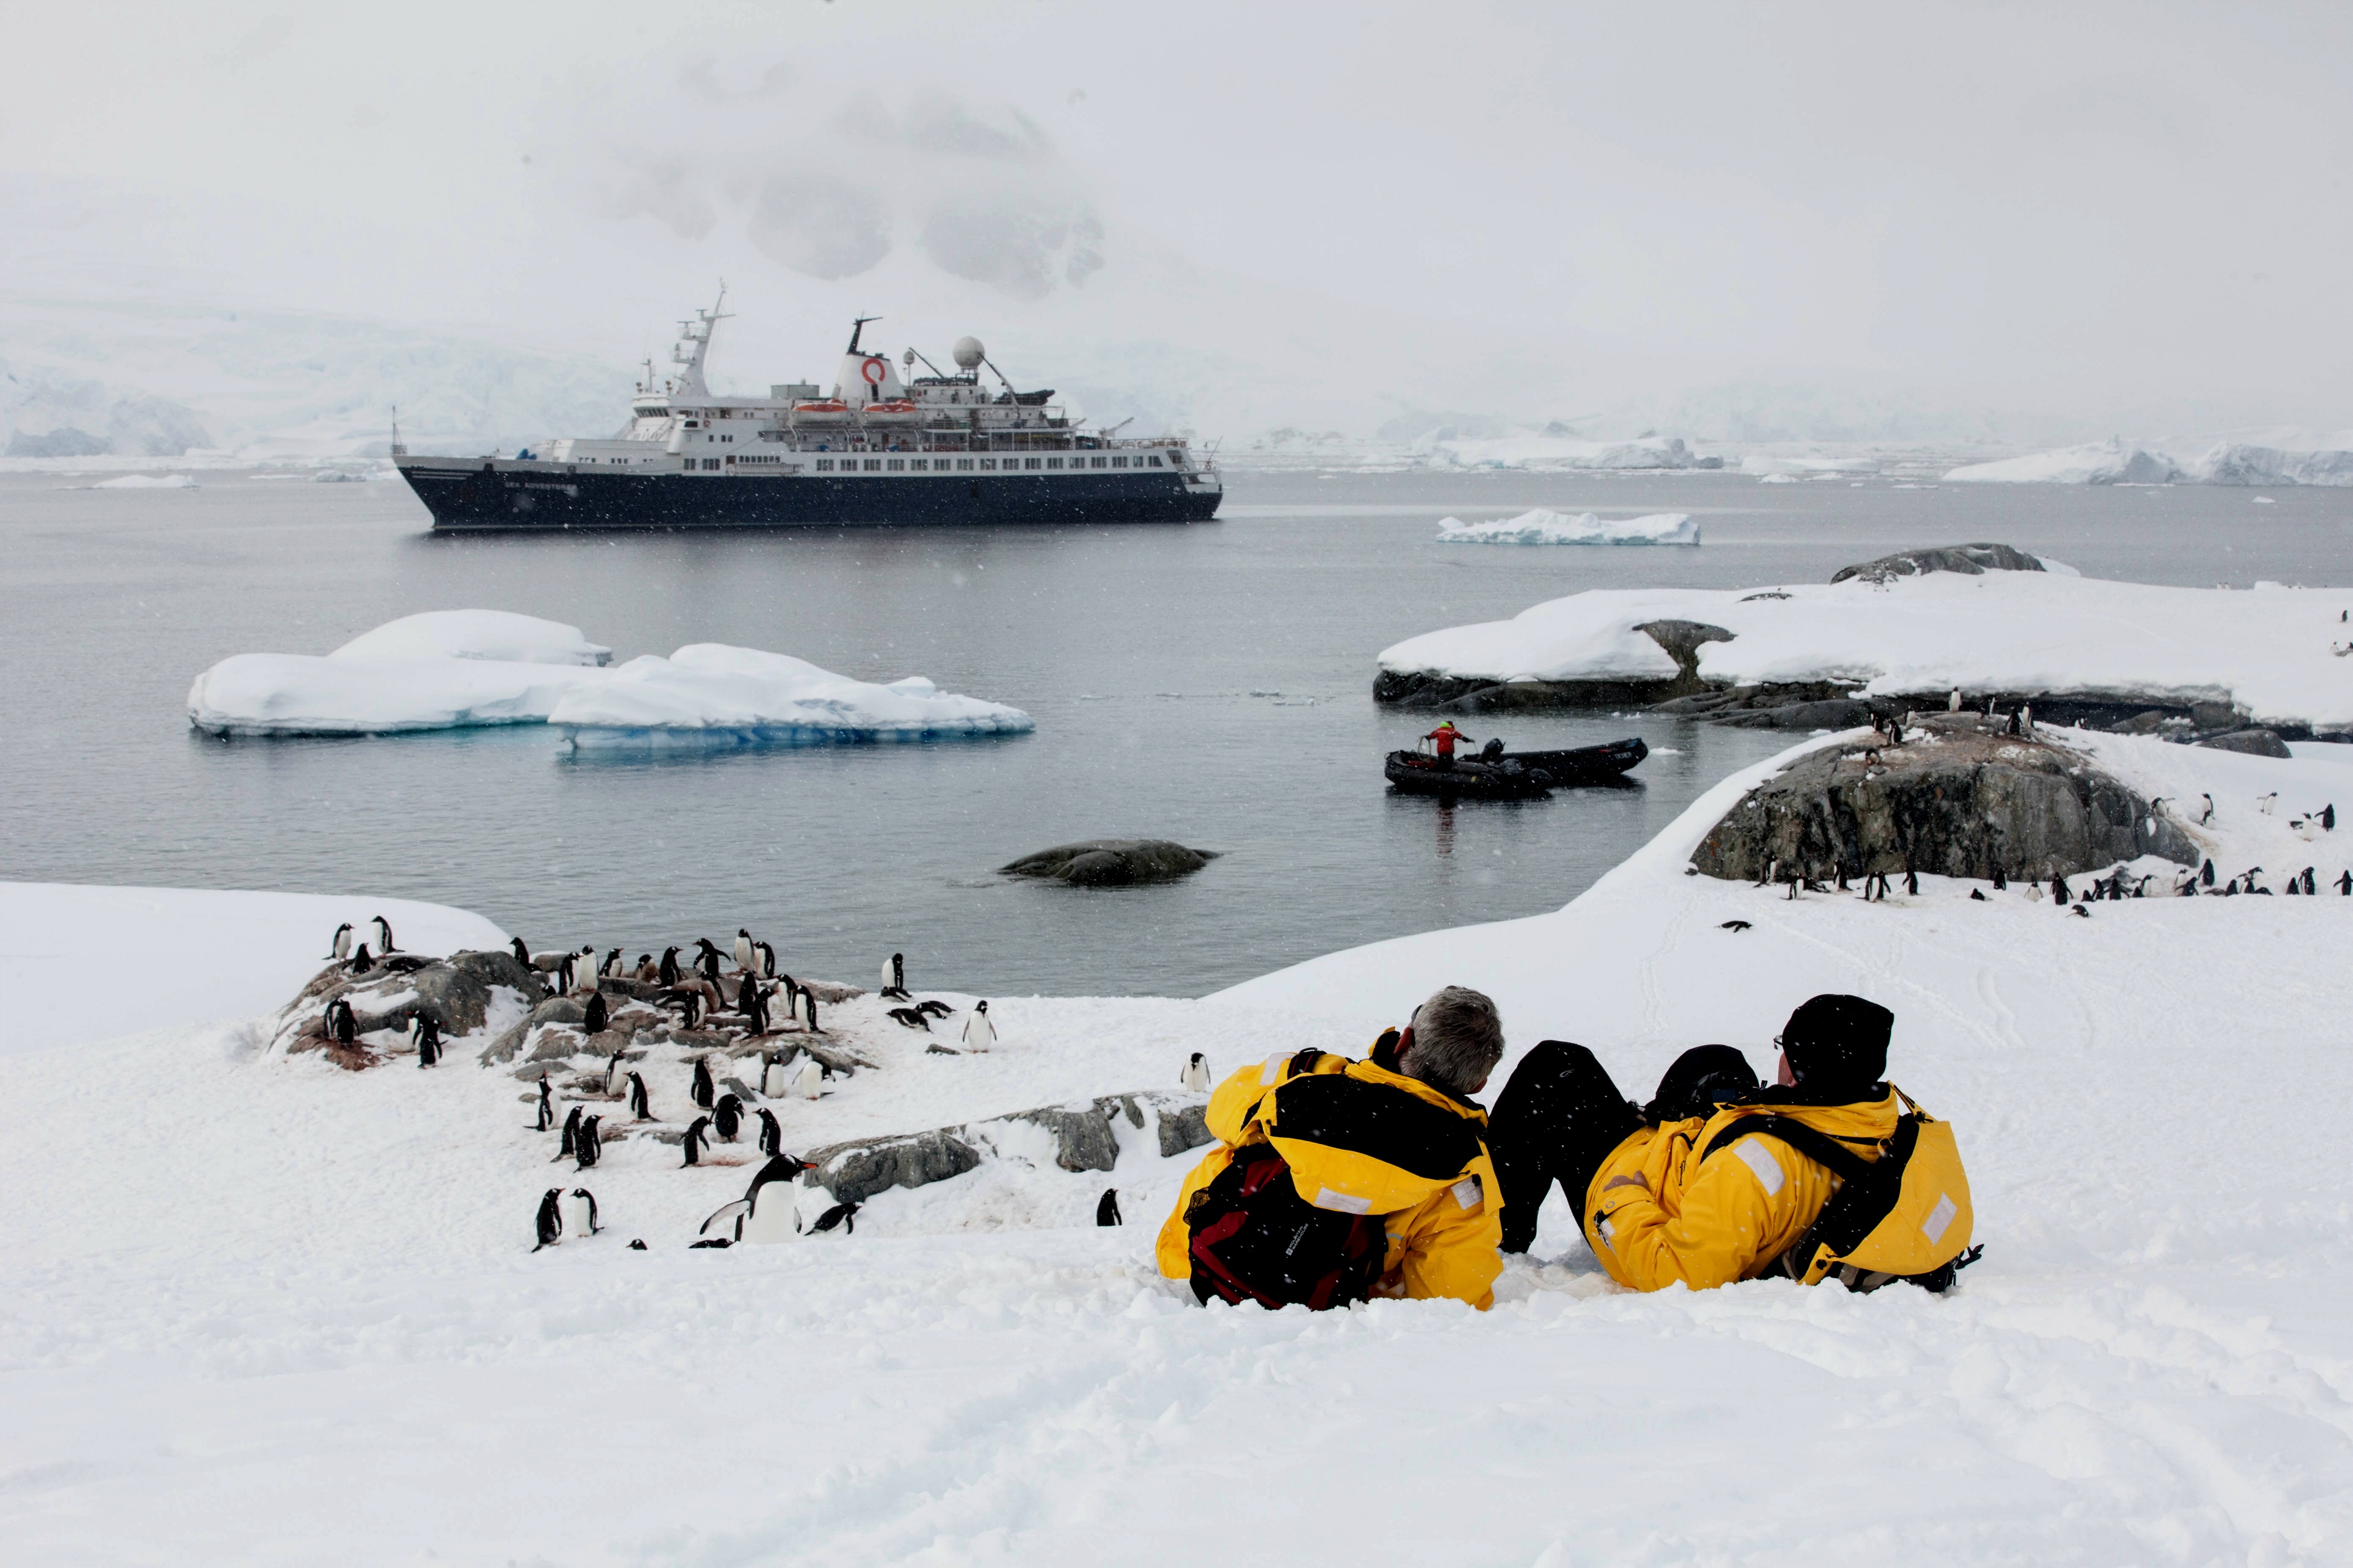 Quark passengers relax and enjoy the view of a penguin colony against a backdrop of frigid Antarctic water.